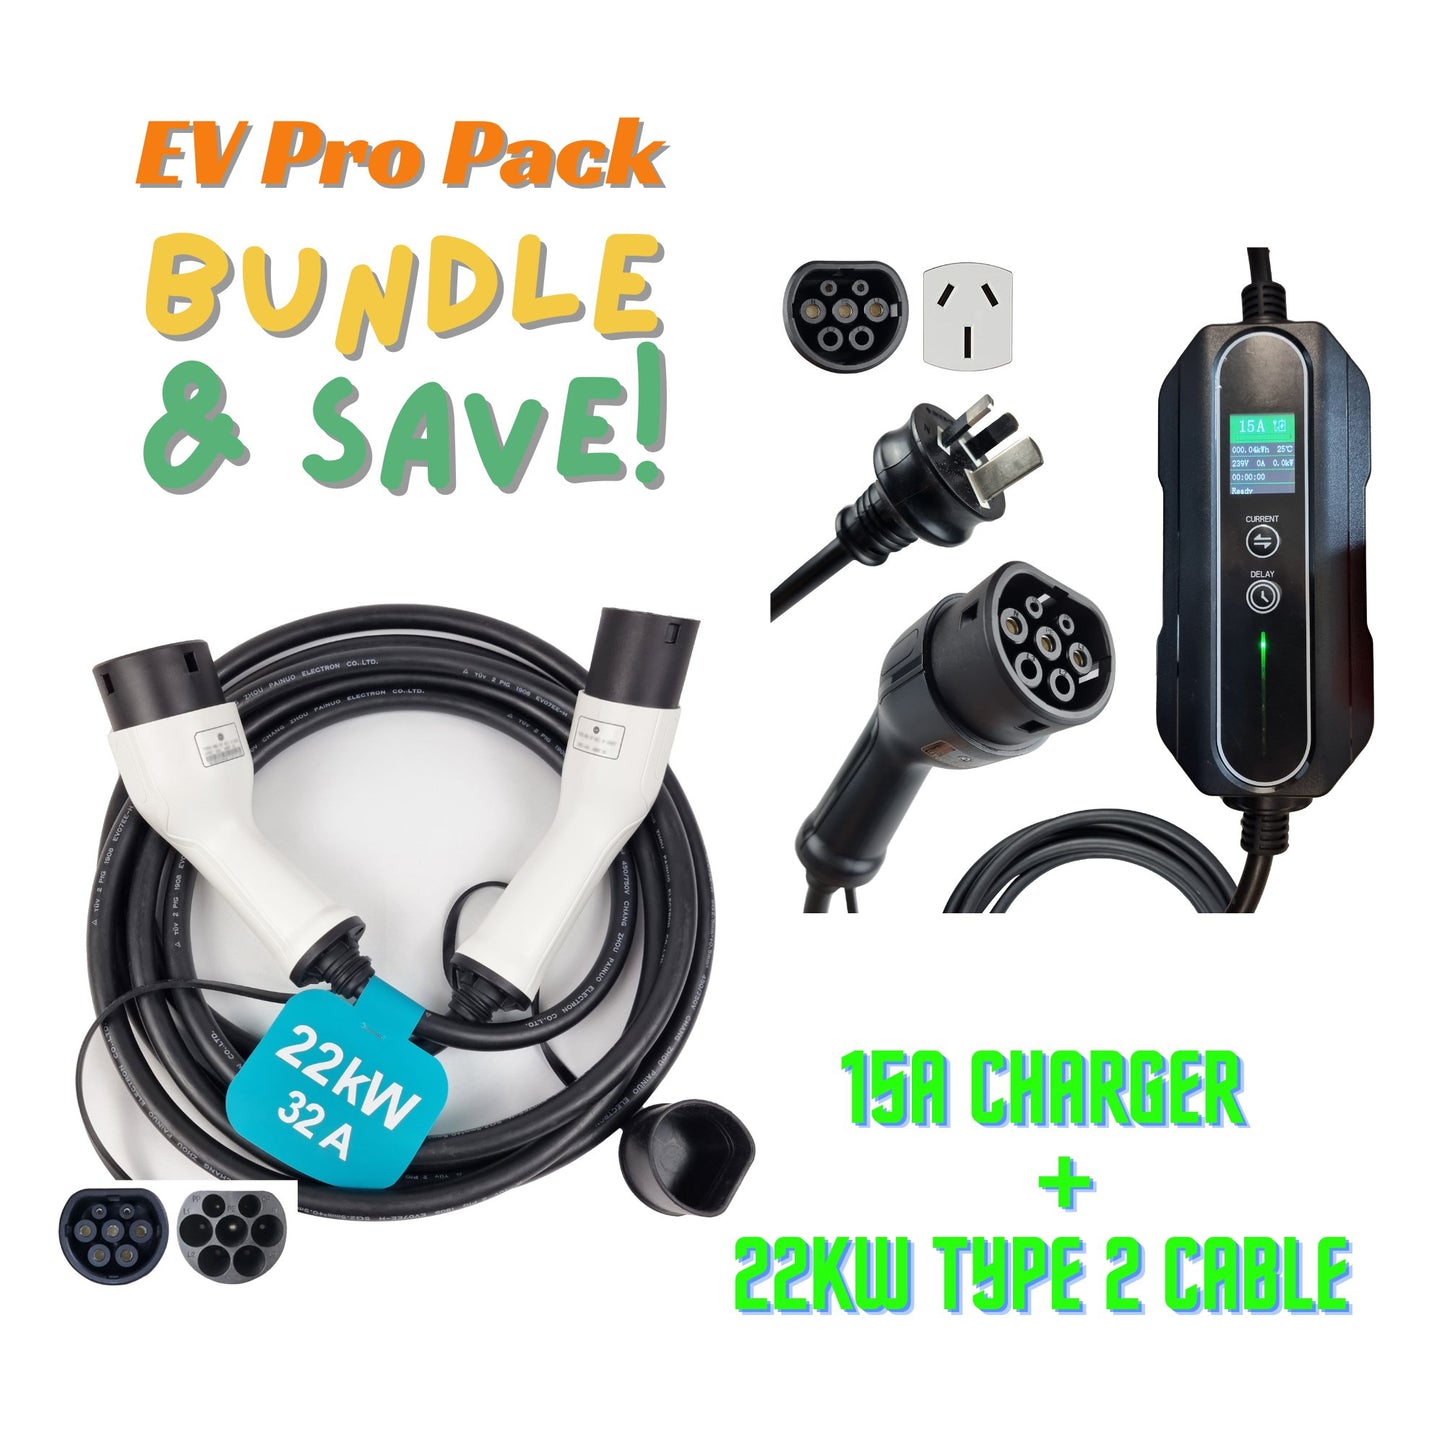 INCHARGEx EV Pro Pack 15A Portable Charger & 22kW Type 2 to Type 2 Cable - INCHARGEx